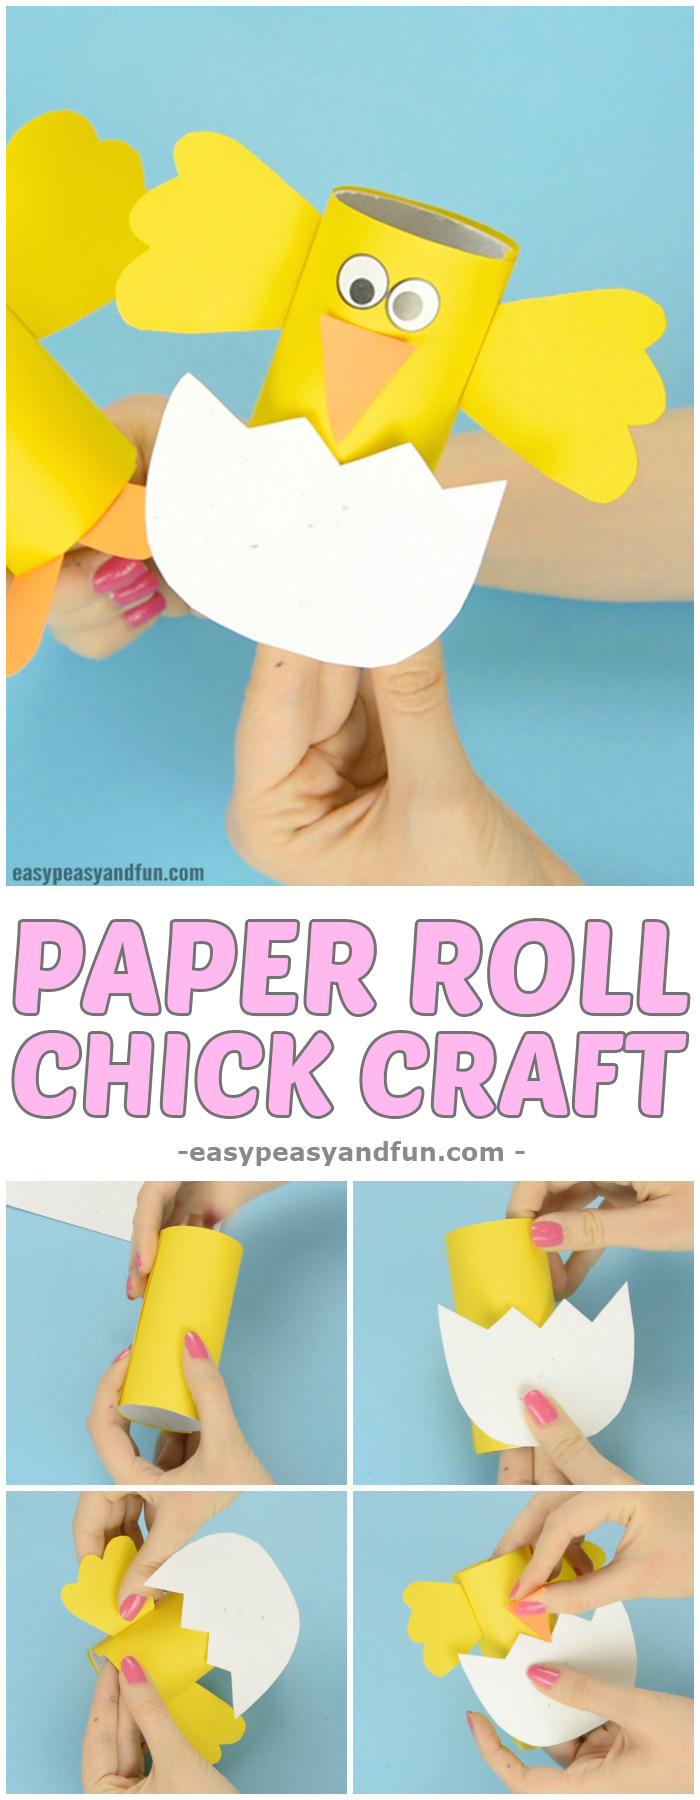 Chick Paper Roll Craft. Fun Easter craft idea for kids to make. #eastercrafts #chickcrafts #toilelpaperrollcrafts